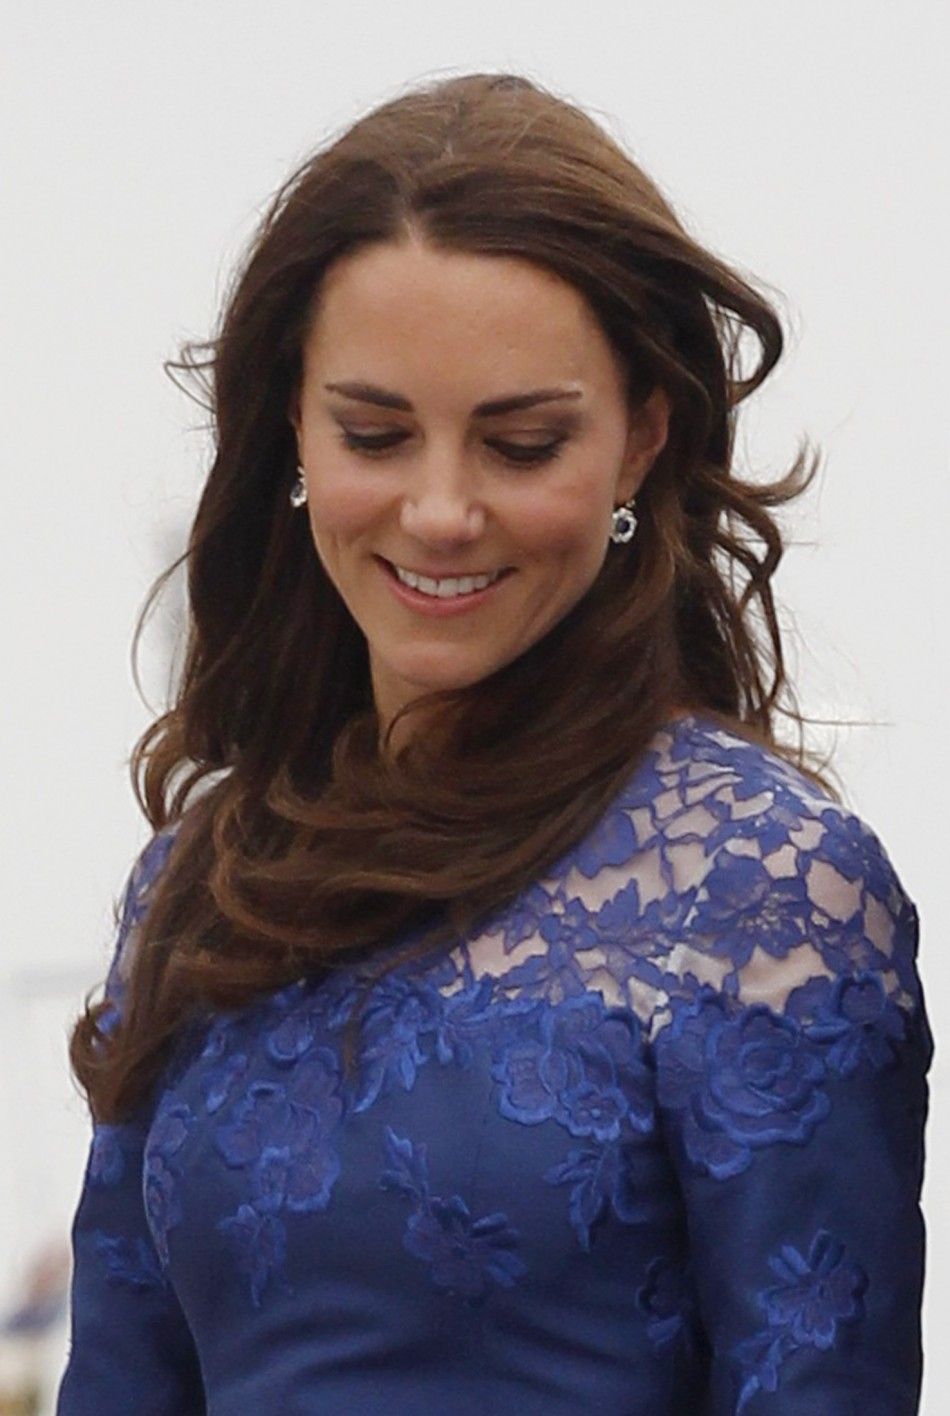 From Kate Middleton to Michelle Obama Top 10 International Best-Dressed Women in 2011.